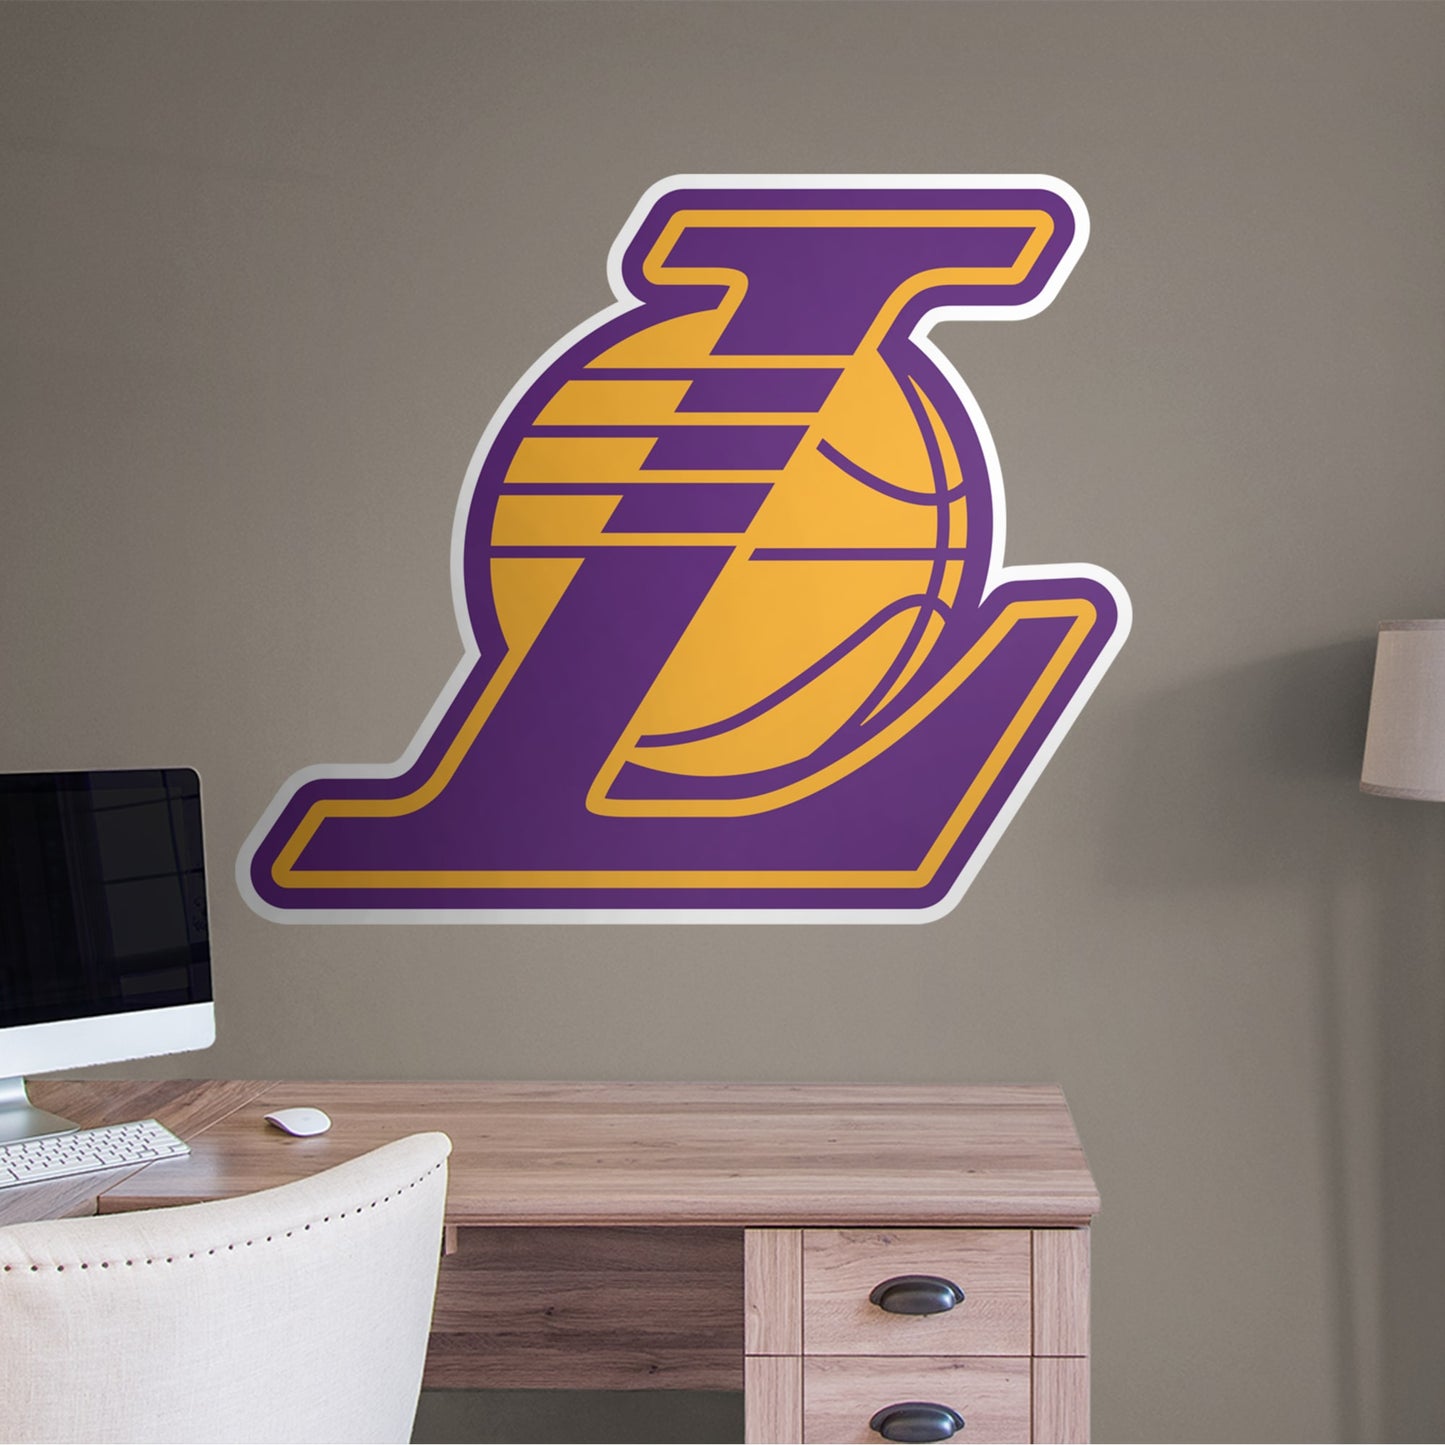 Los Angeles Lakers Magic Johnson Fathead Life Size Removable Wall Decal